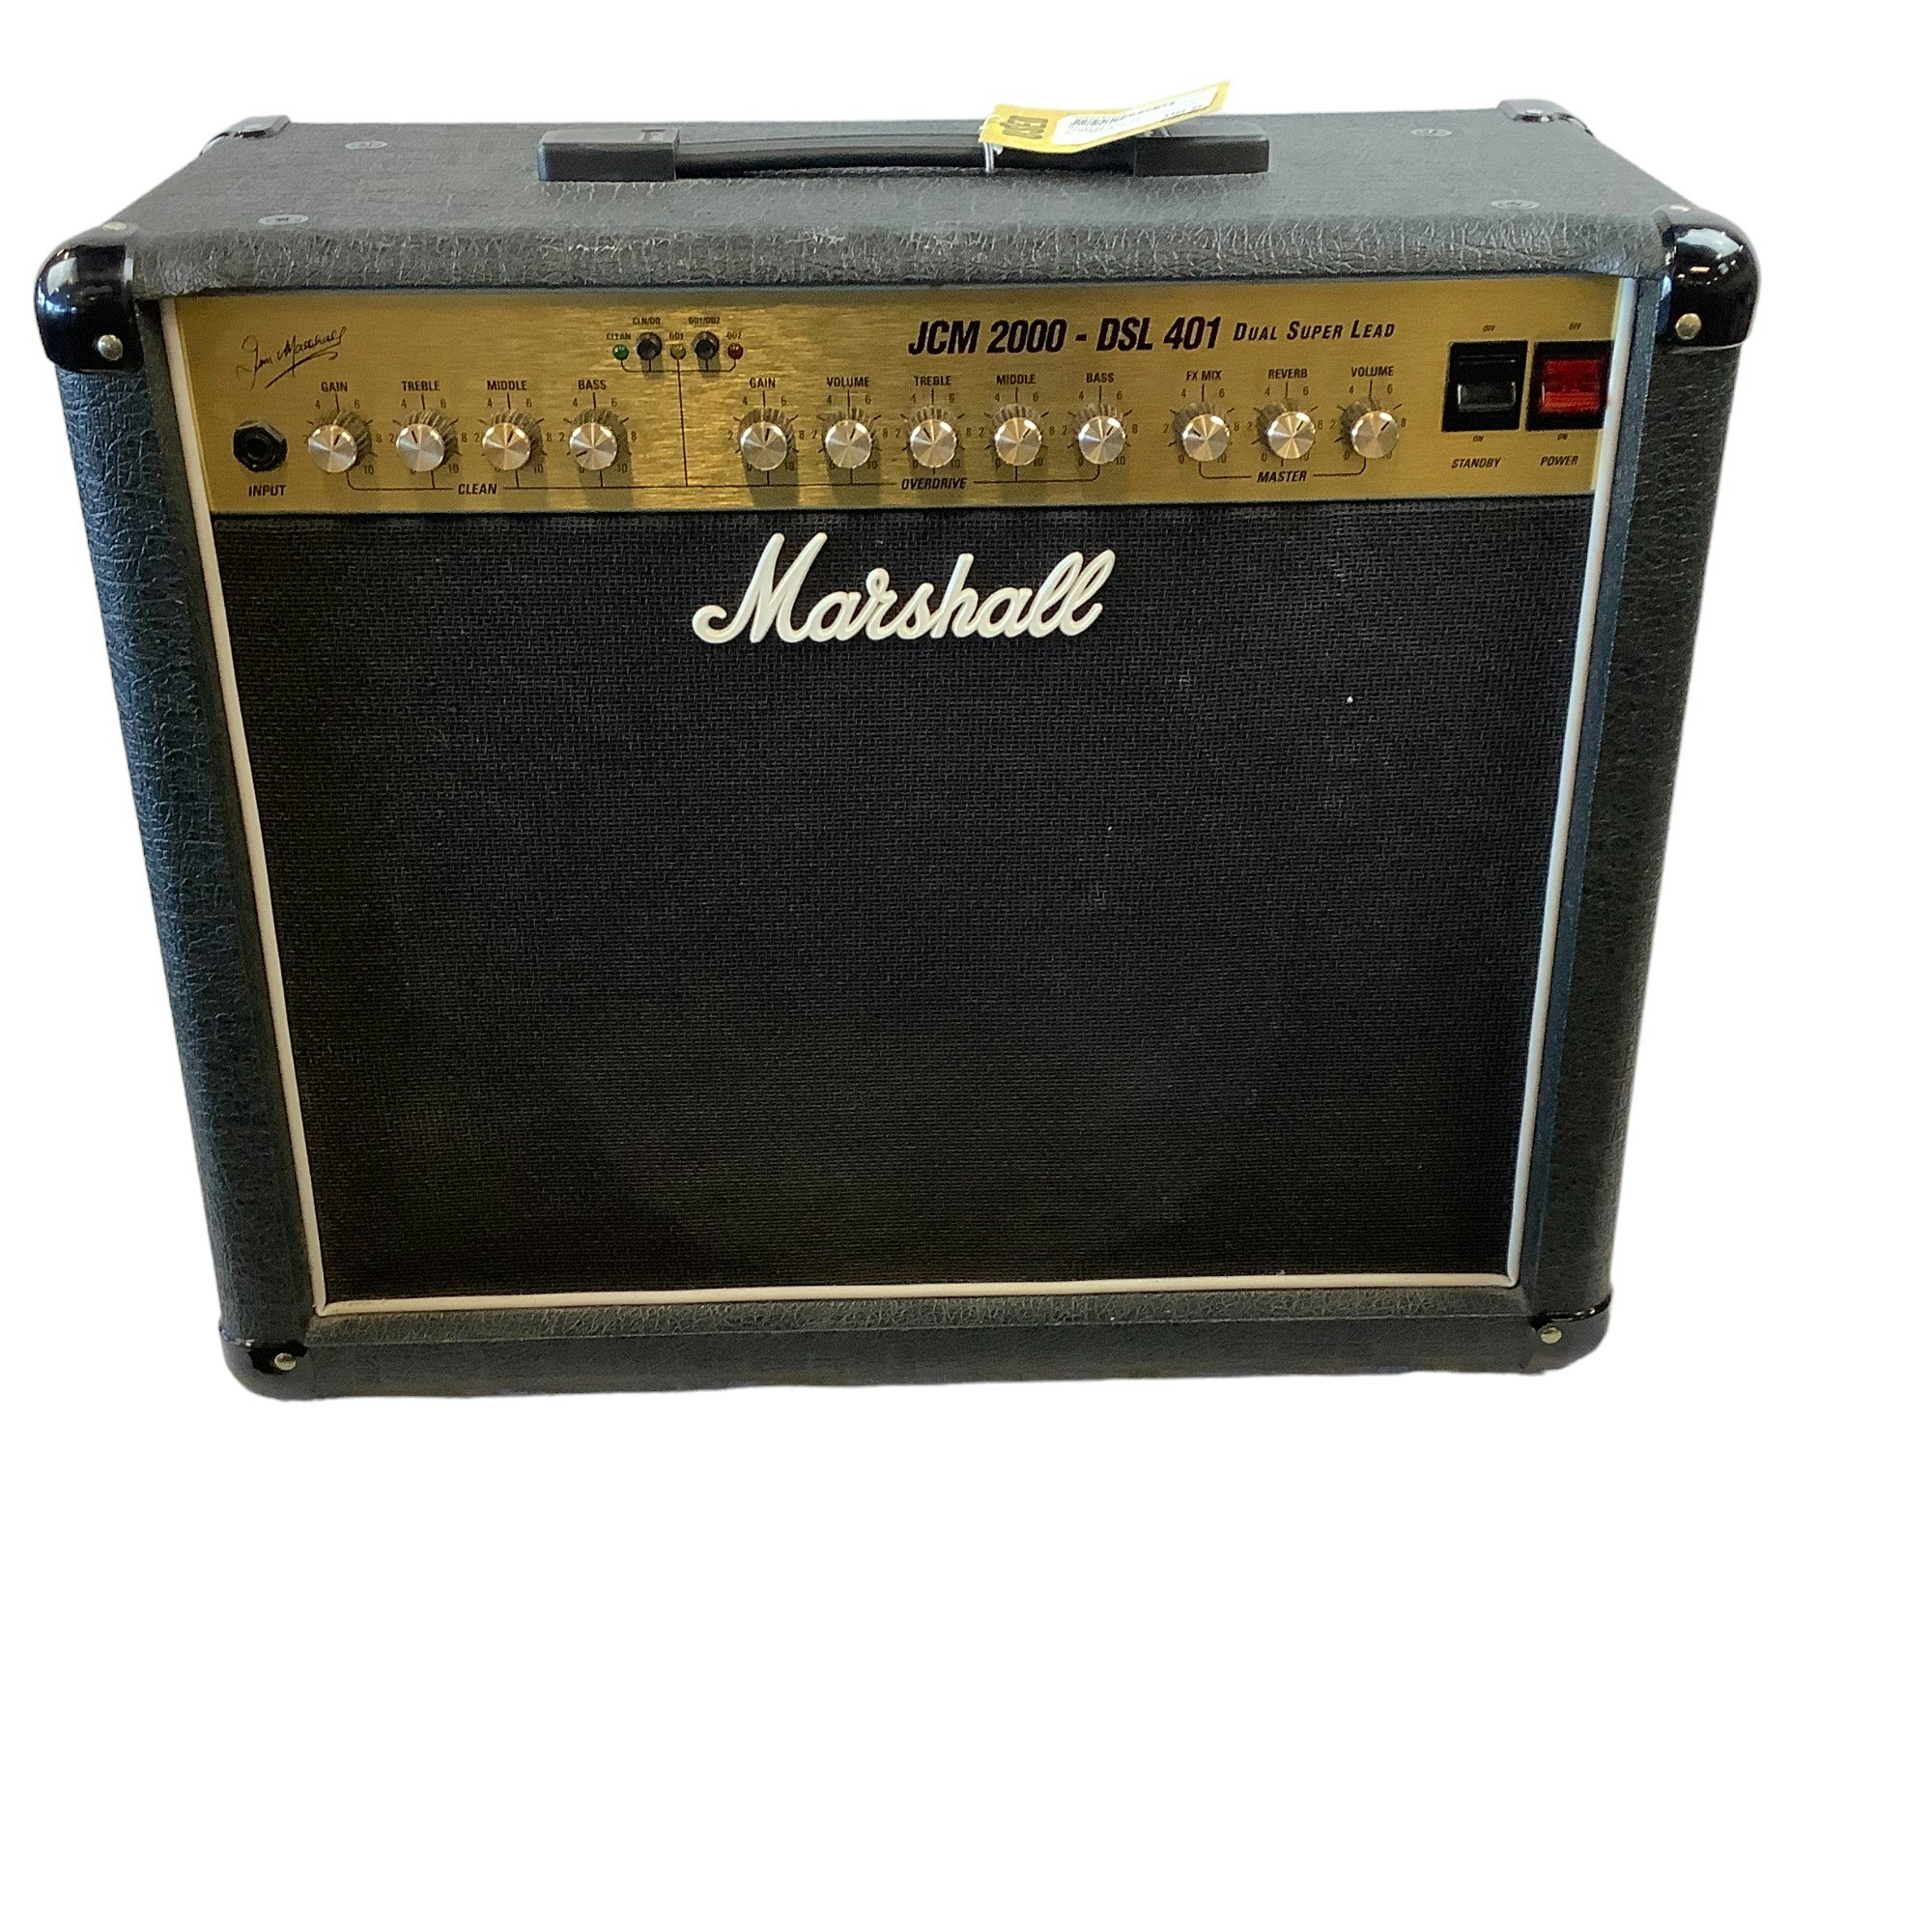 Used Marshall JCM2000 DSL 401 SUPERLEAD Solid State Guitar Amps